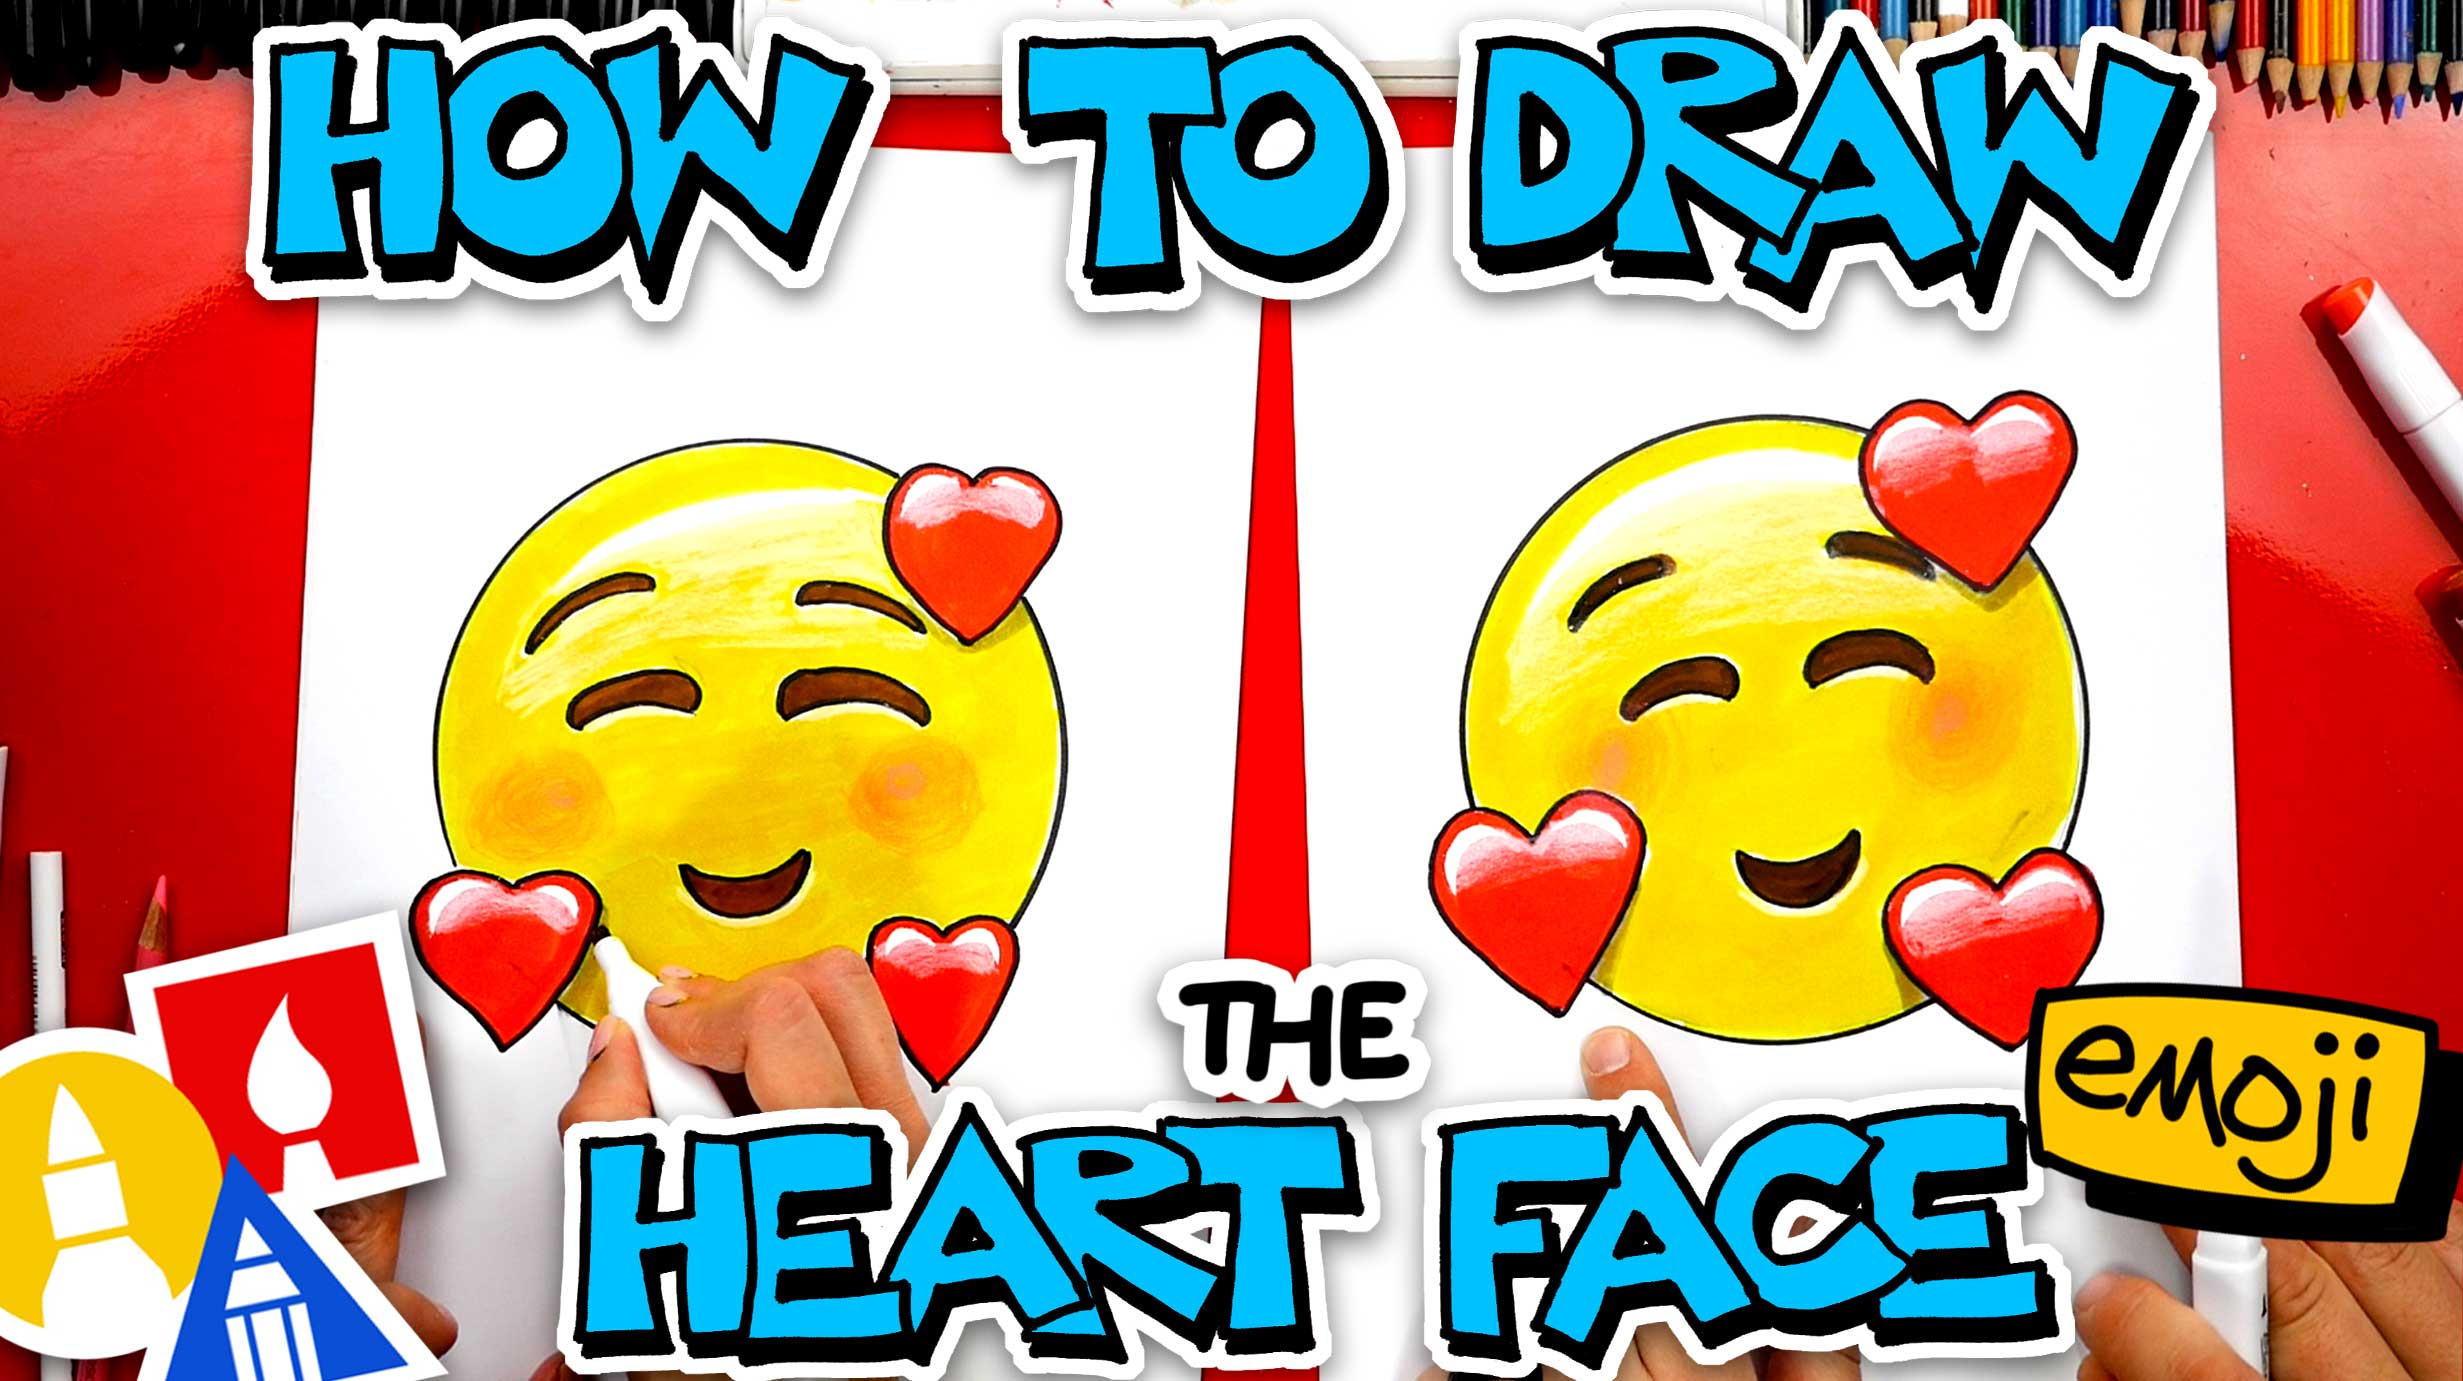 How To Draw The Heart Face Emoji - Art For Kids Hub